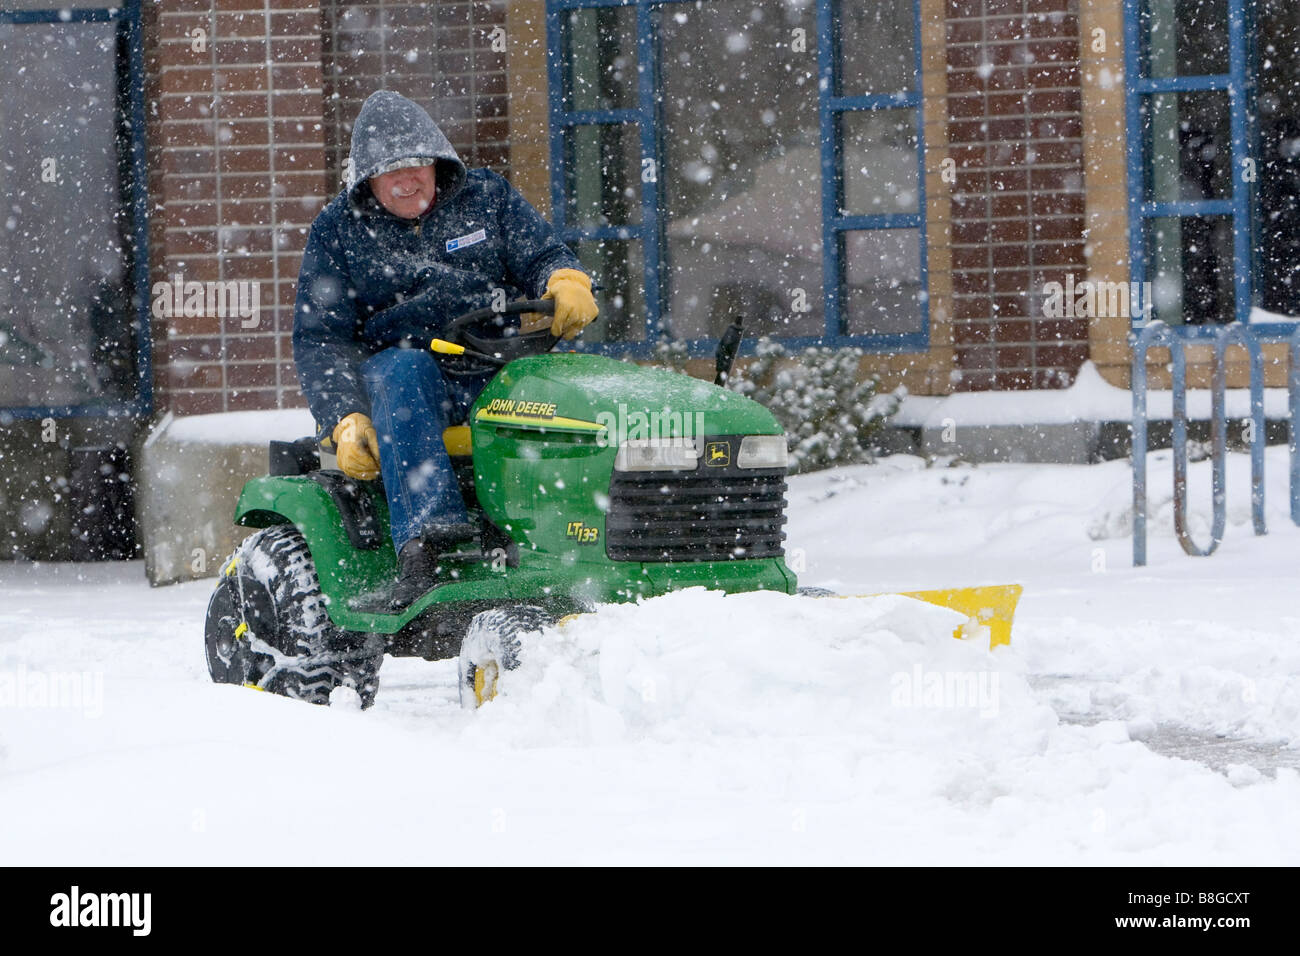 John Deere riding lawn mower fitted with a snow plow removing snow from a parking lot in Boise Idaho USA Stock Photo